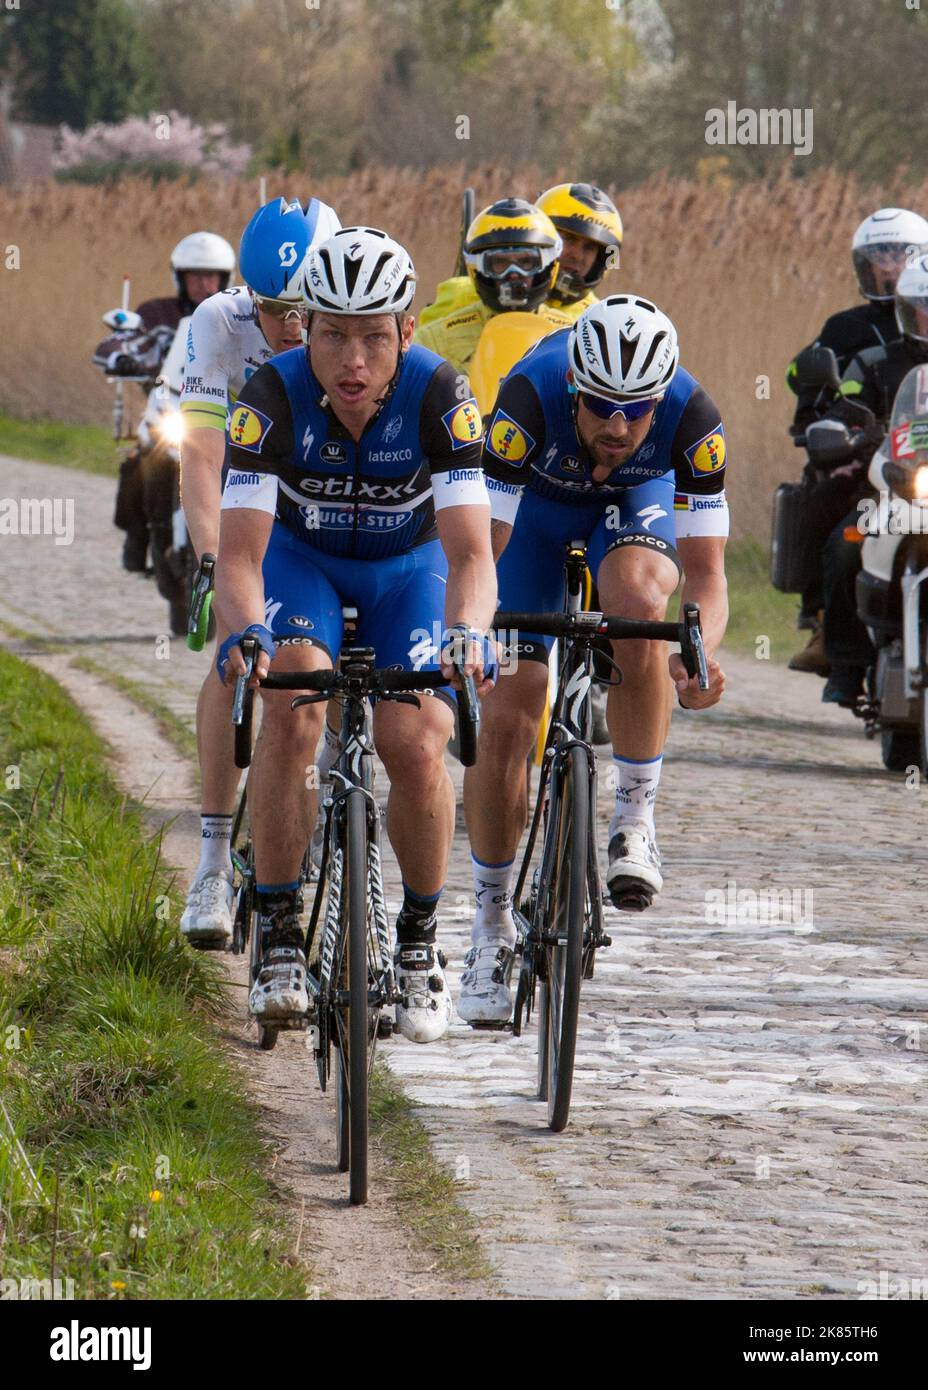 Tony Martin drives the pace for team mate Tom Boonen (Ettix Quick Step) at they head into cobbled sector 17 Stock Photo